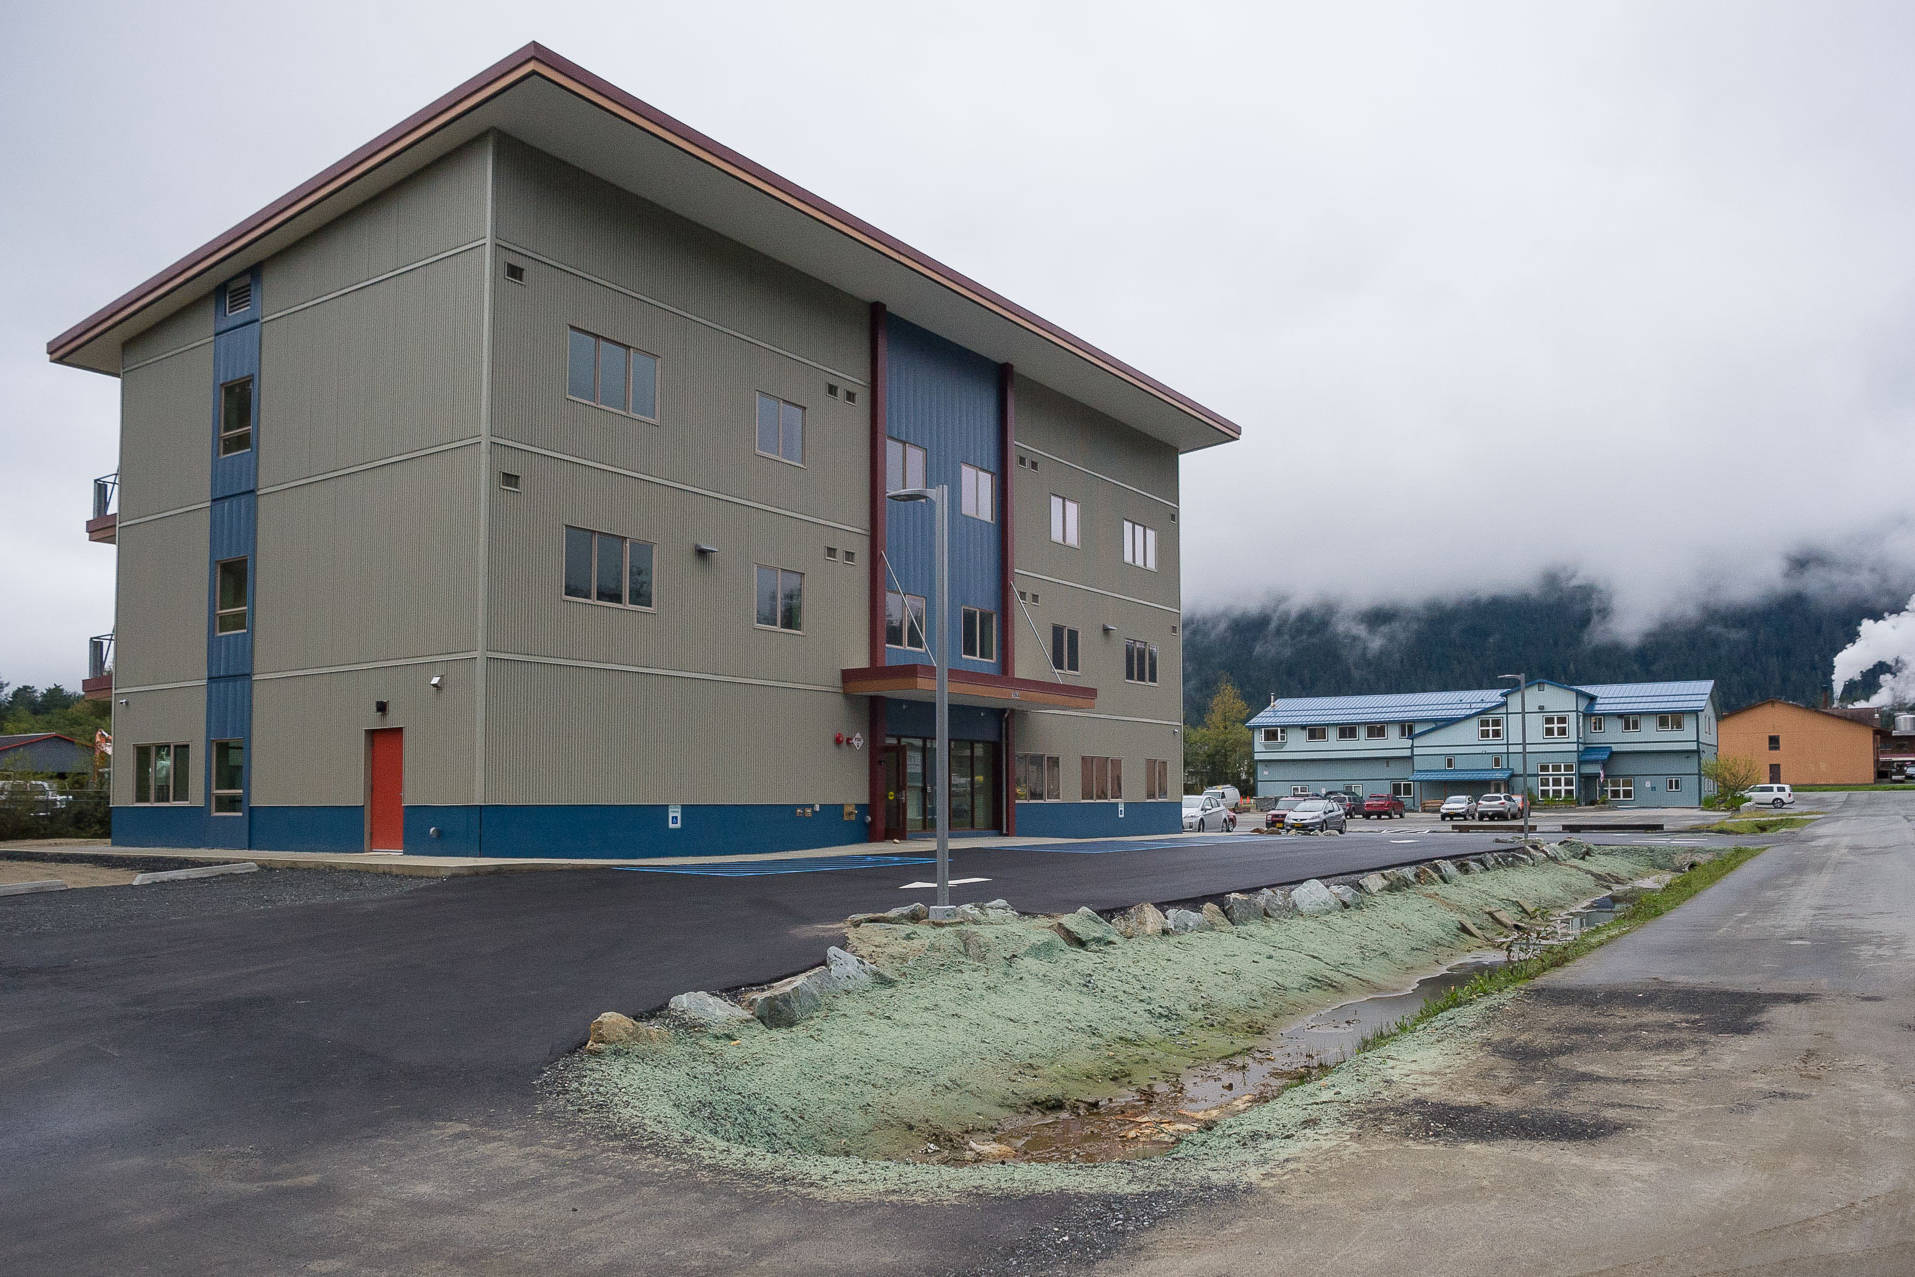 A $75,000 grant to Juneau Alliance for Mental Health, Inc. Health & Wellness, Inc will help fund a behavioral health clinician for residents of Forget-Me-Not Manor, a Housing First building seen in this Tuesday, Sept. 19, 2017. (Michael Penn | Juneau Empire File)